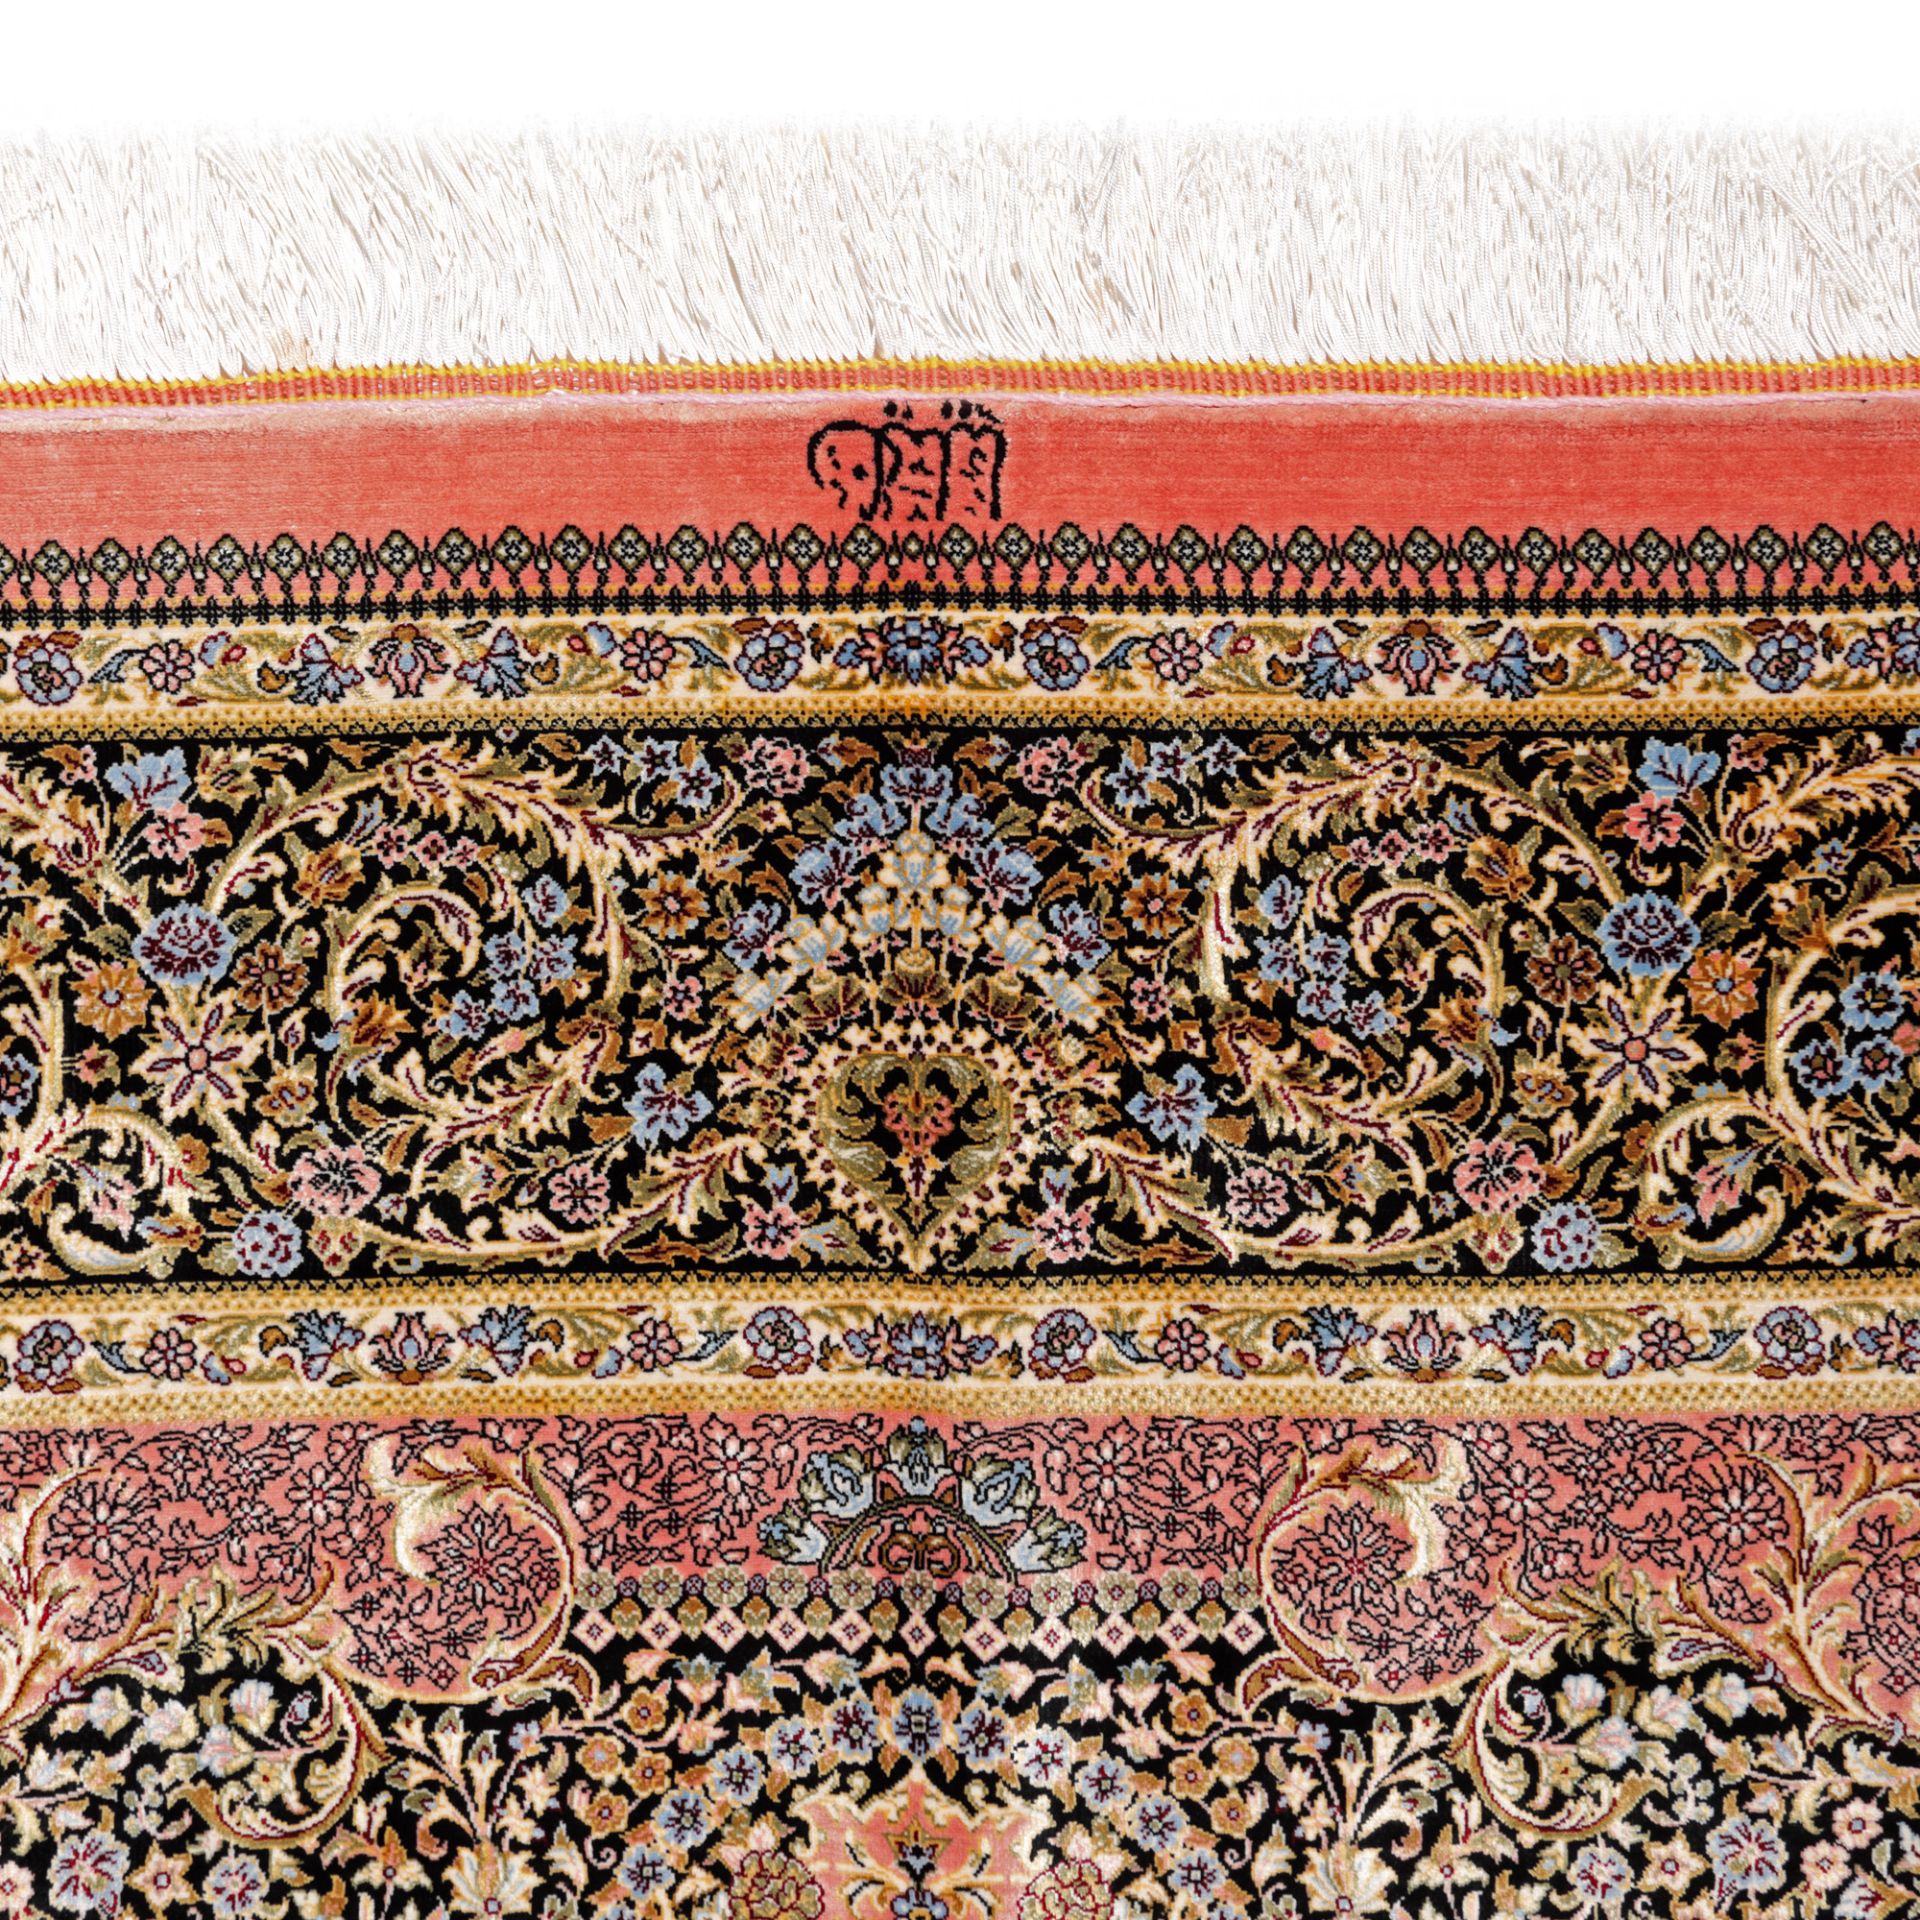 Exceptional Qum rug, silk, decorated with rich floral motifs, Iran - Image 2 of 2